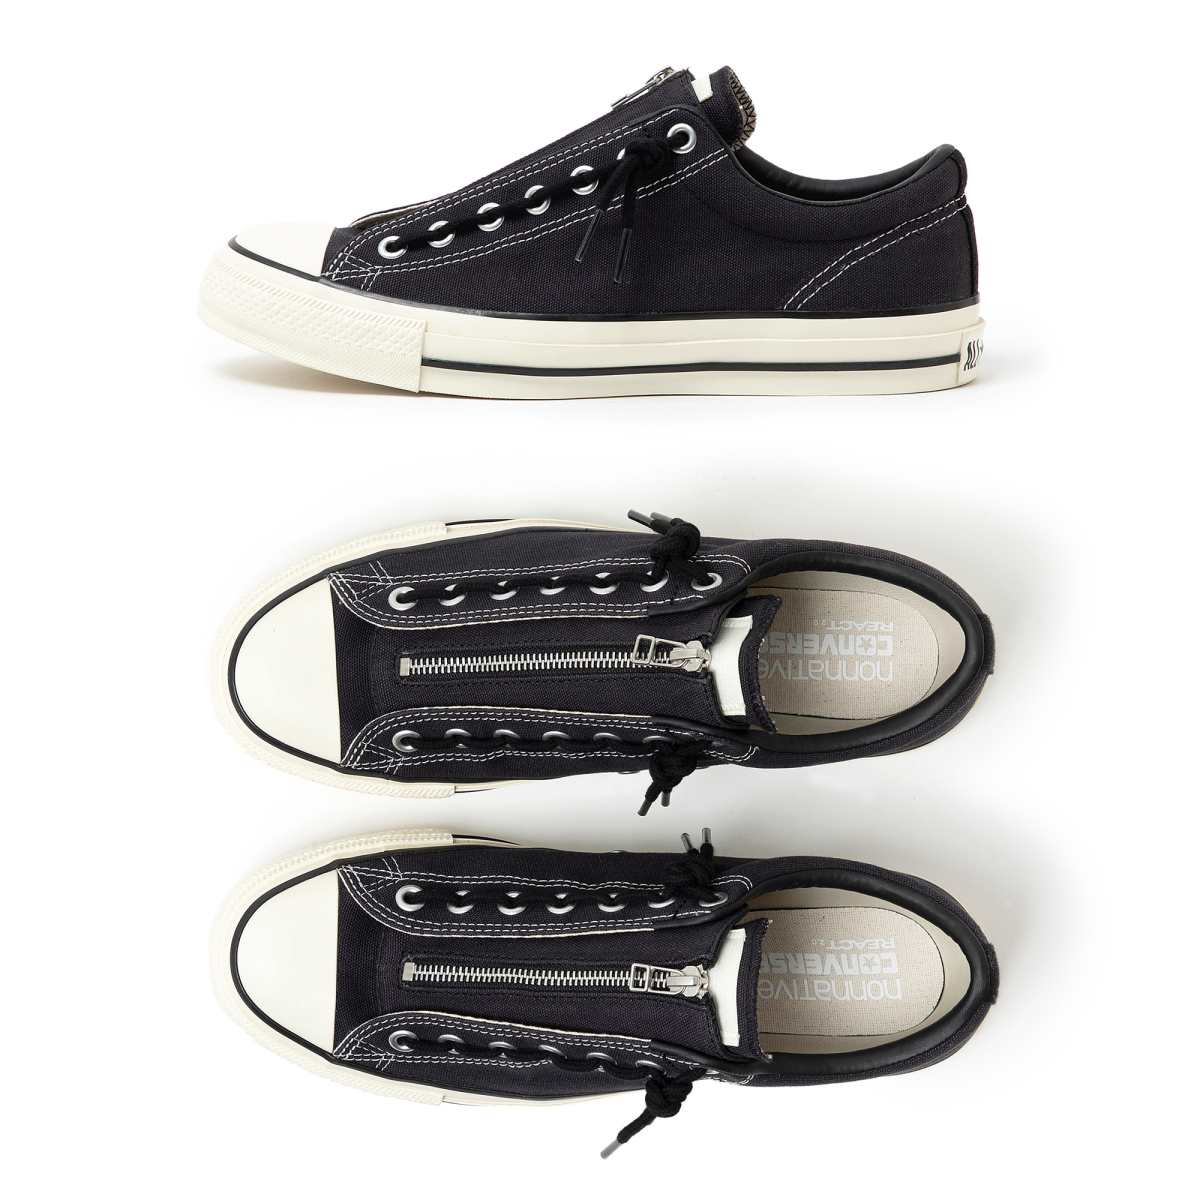 nonnative and Converse reveal their thoroughly revamped Chuck 